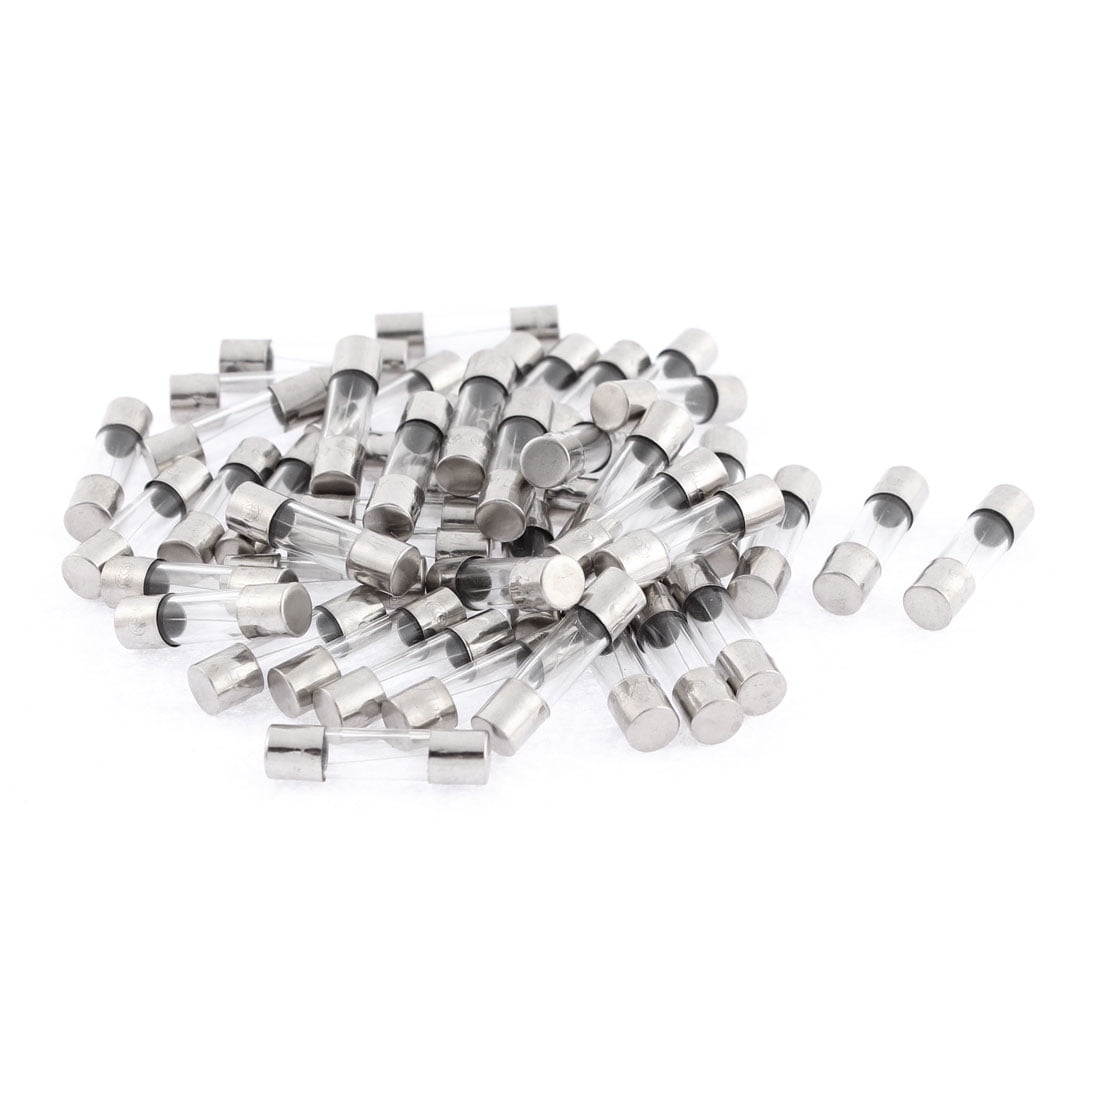 250V 2A Fast Quick Blow Glass Tube Fuses 6mm x 30mm 50 Pcs by Houseuse 